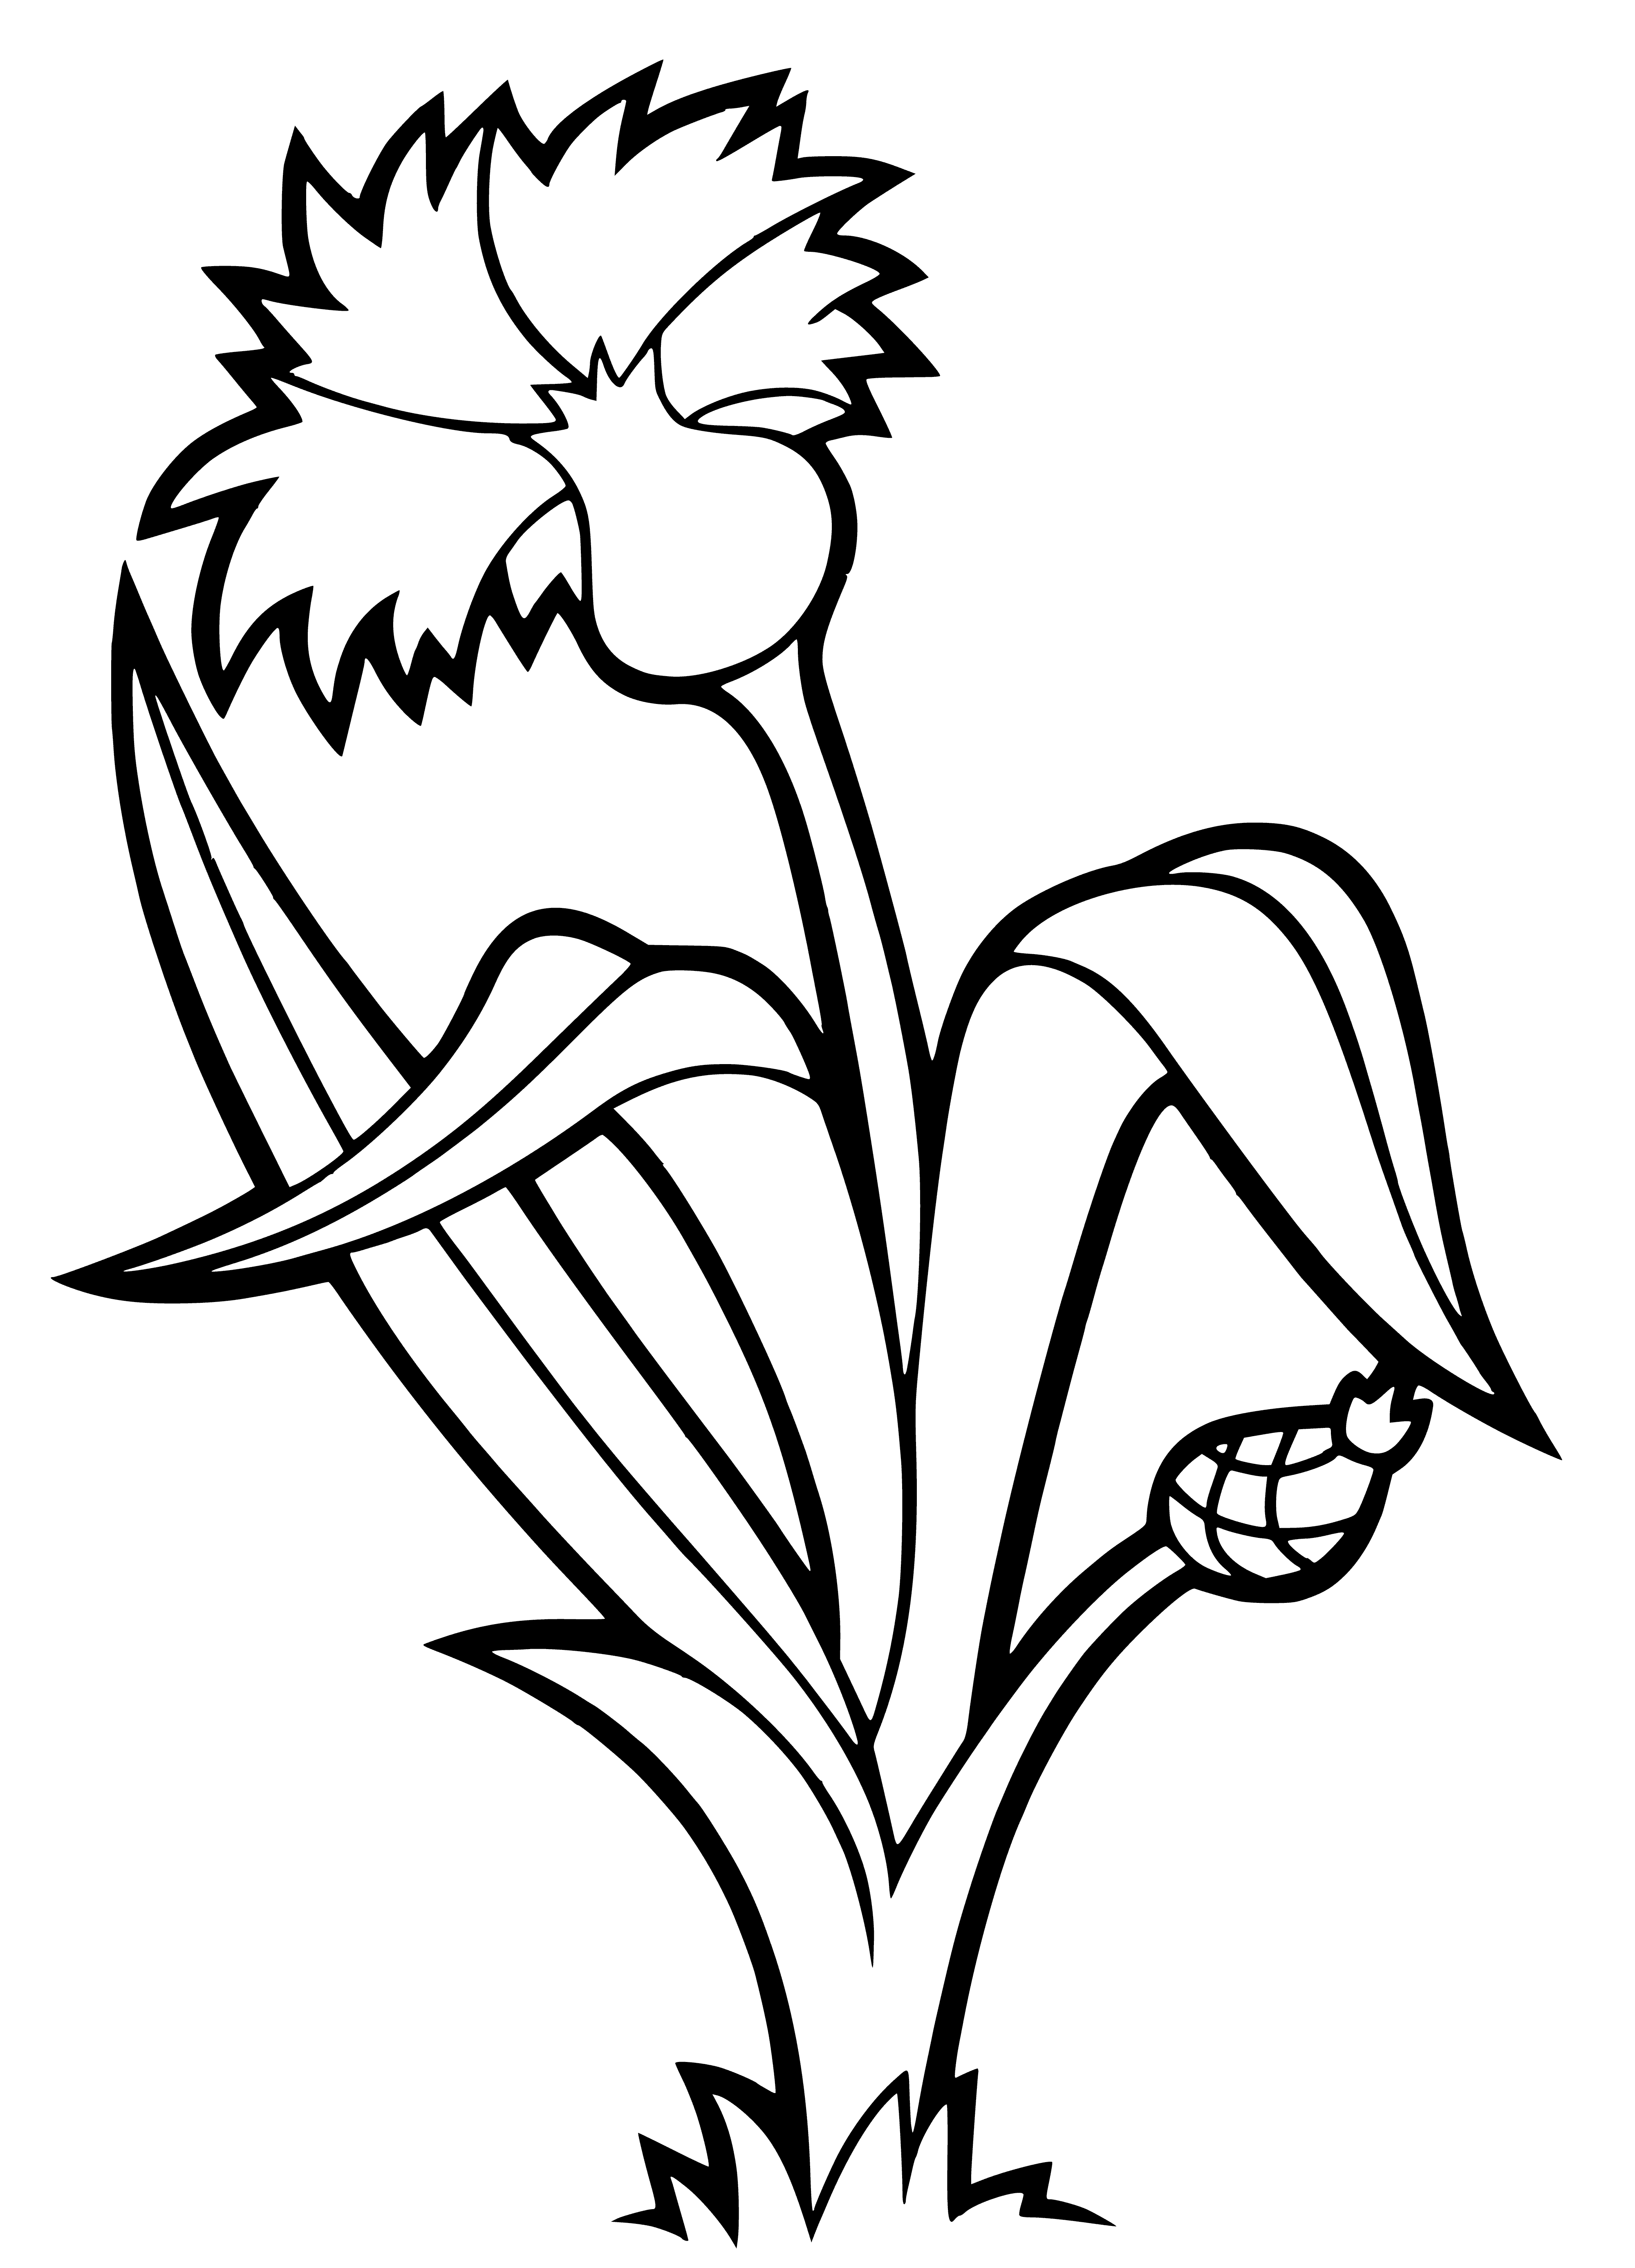 Cornflower coloring page